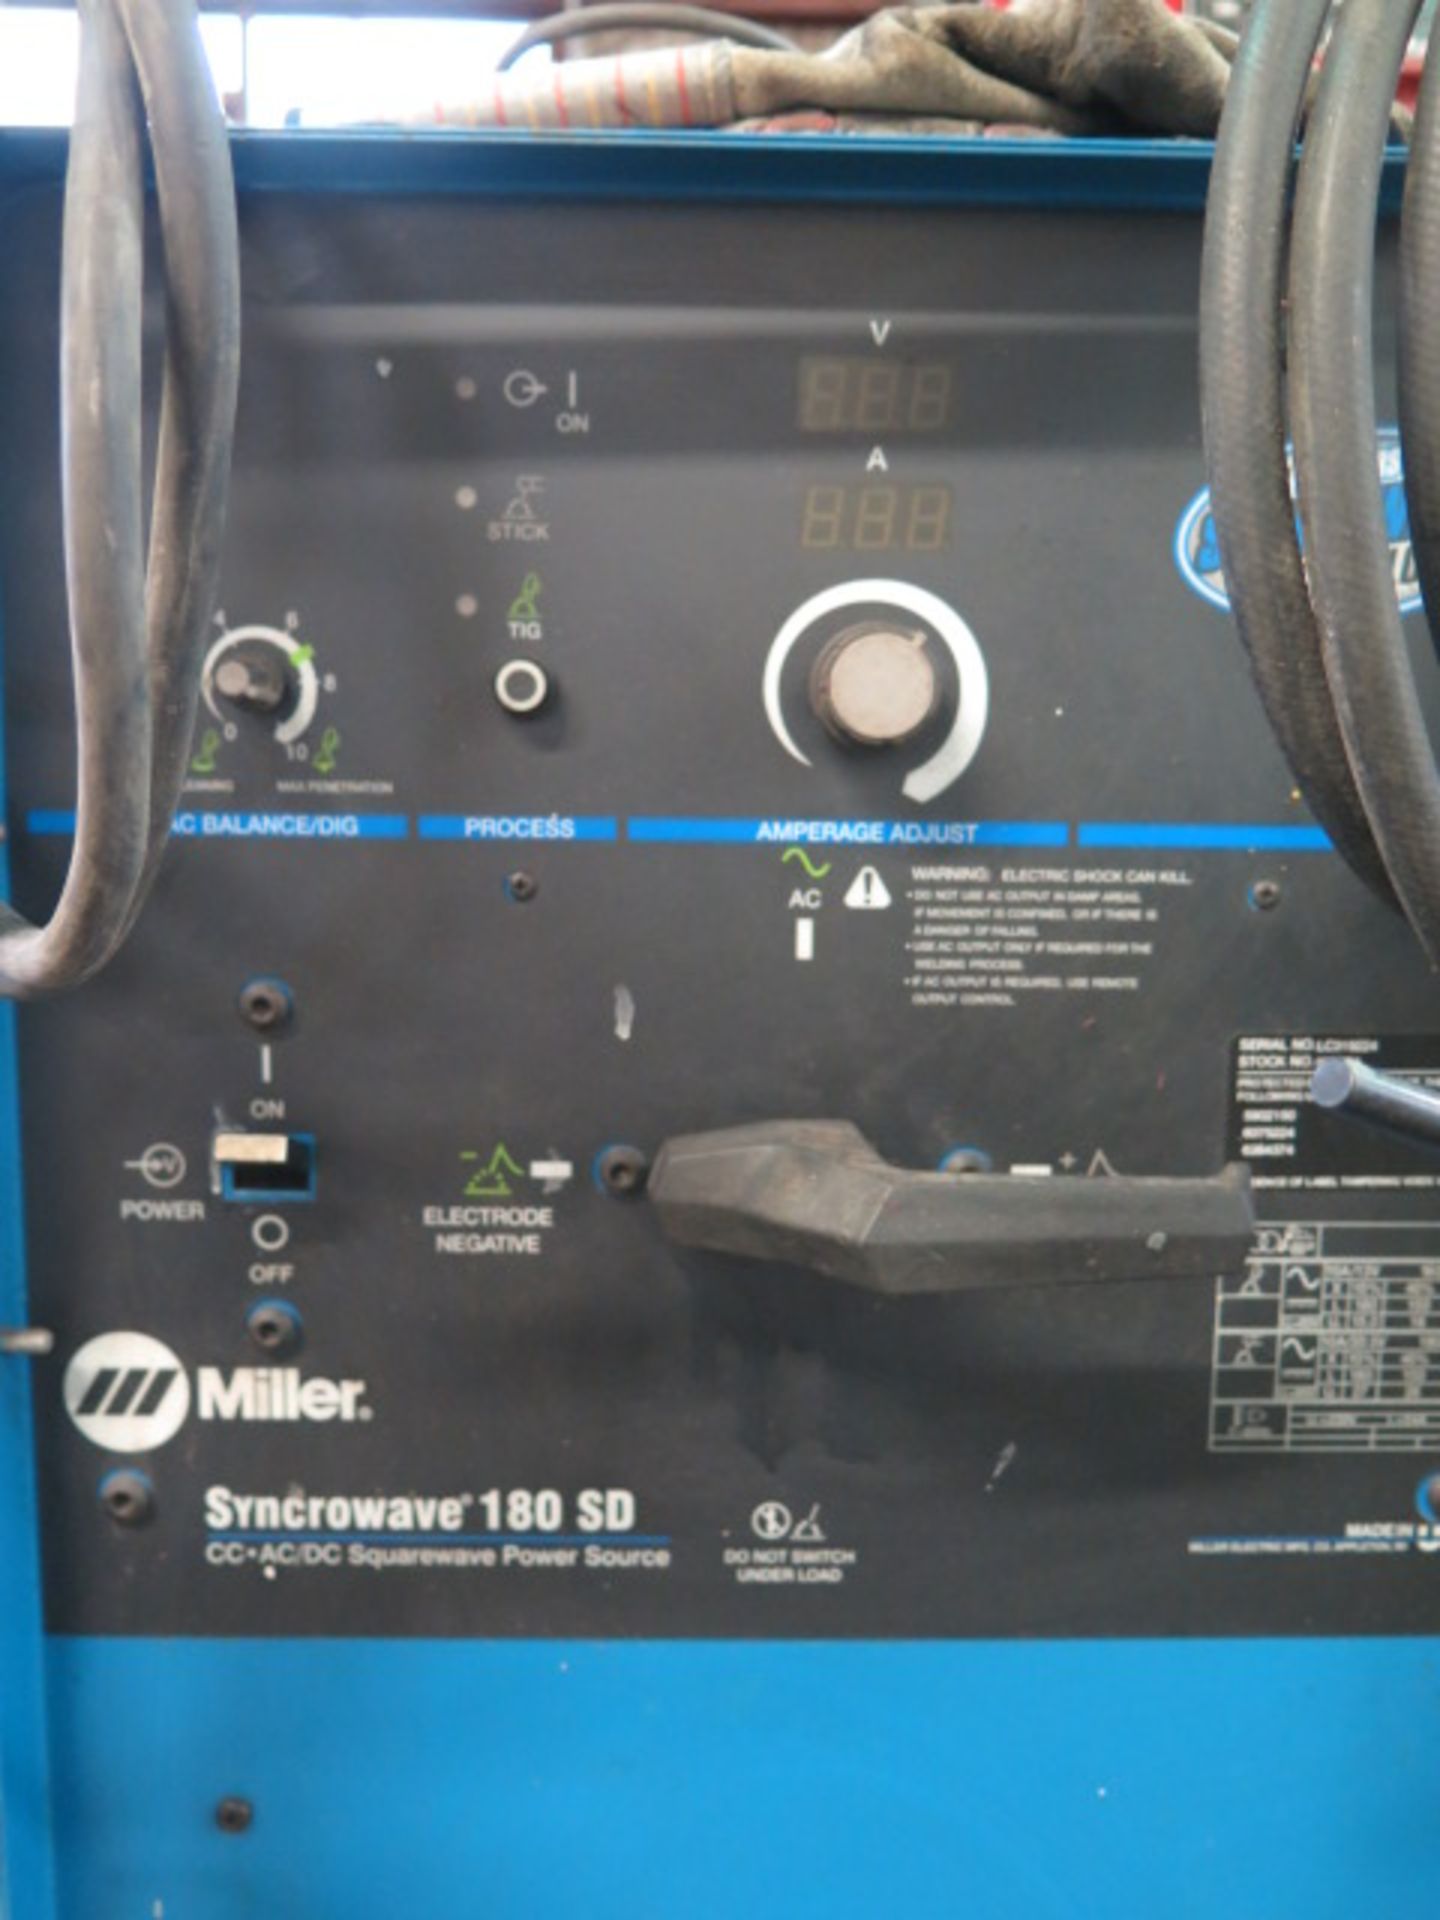 Miller Syncrowave 180SD CC-AC/DC Squarewave Power Source s/n LC319224 - Image 2 of 4